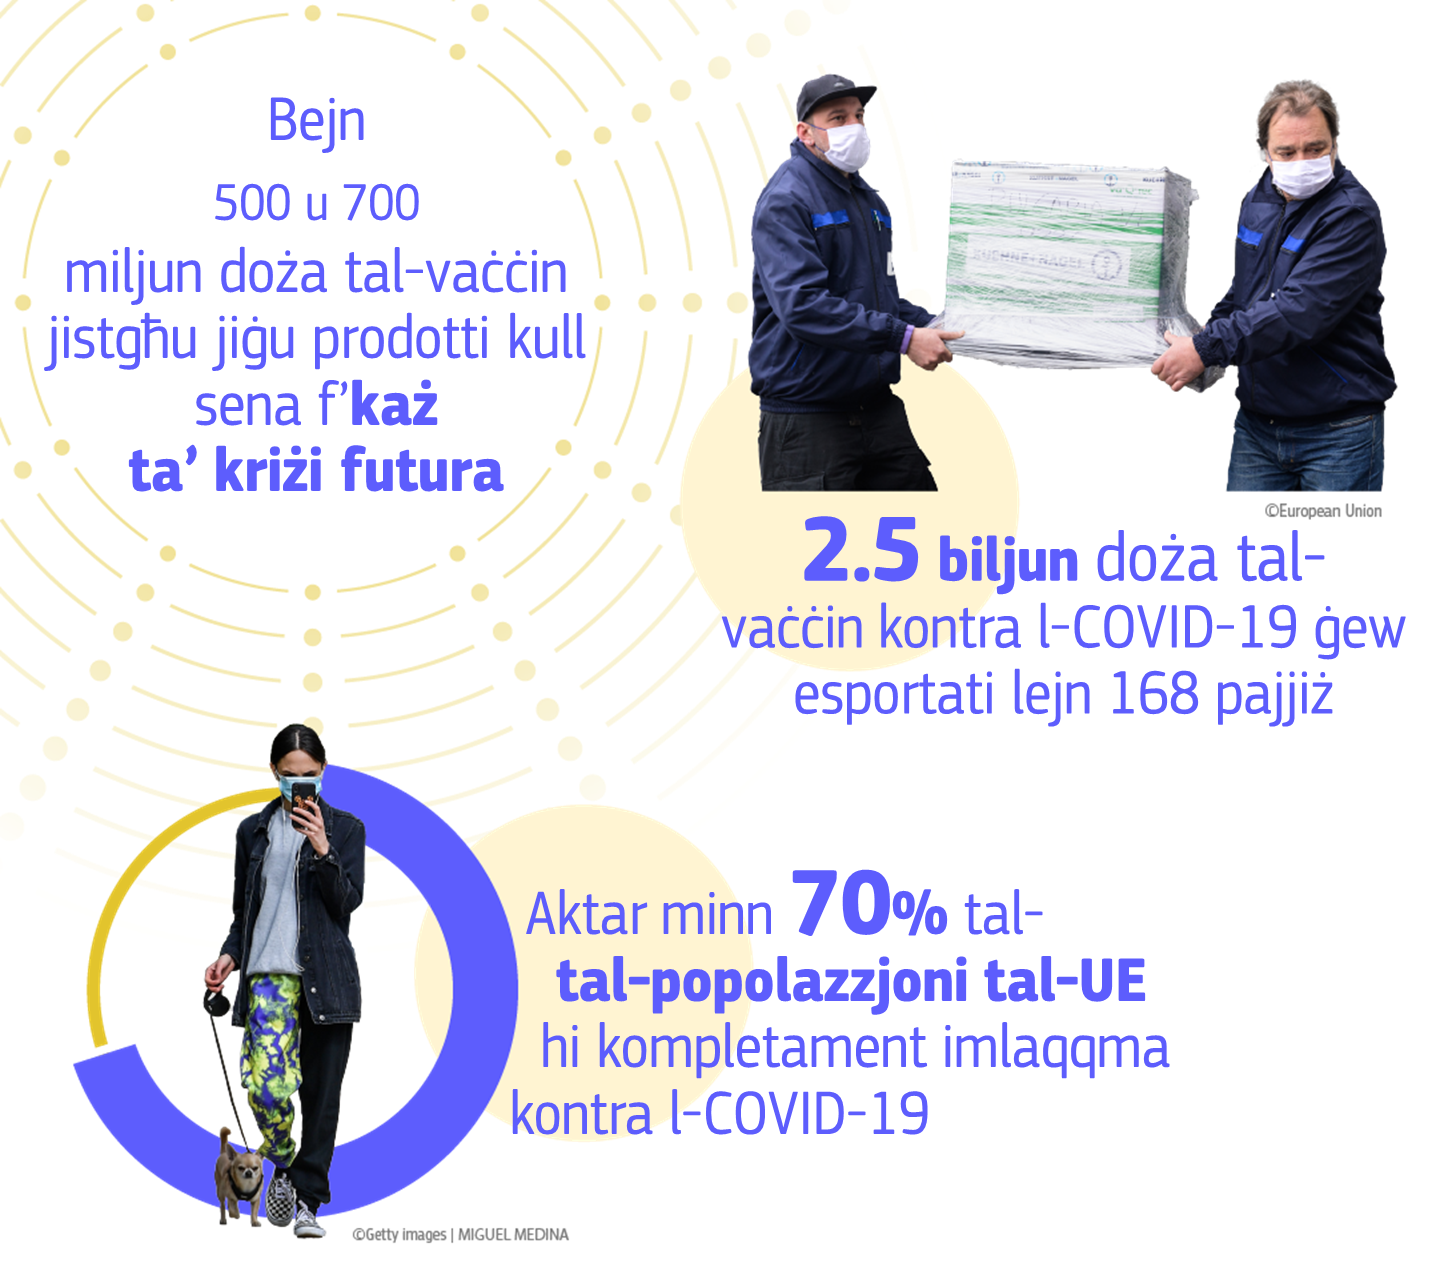 Infographic on overcoming COVID-19 in the EU